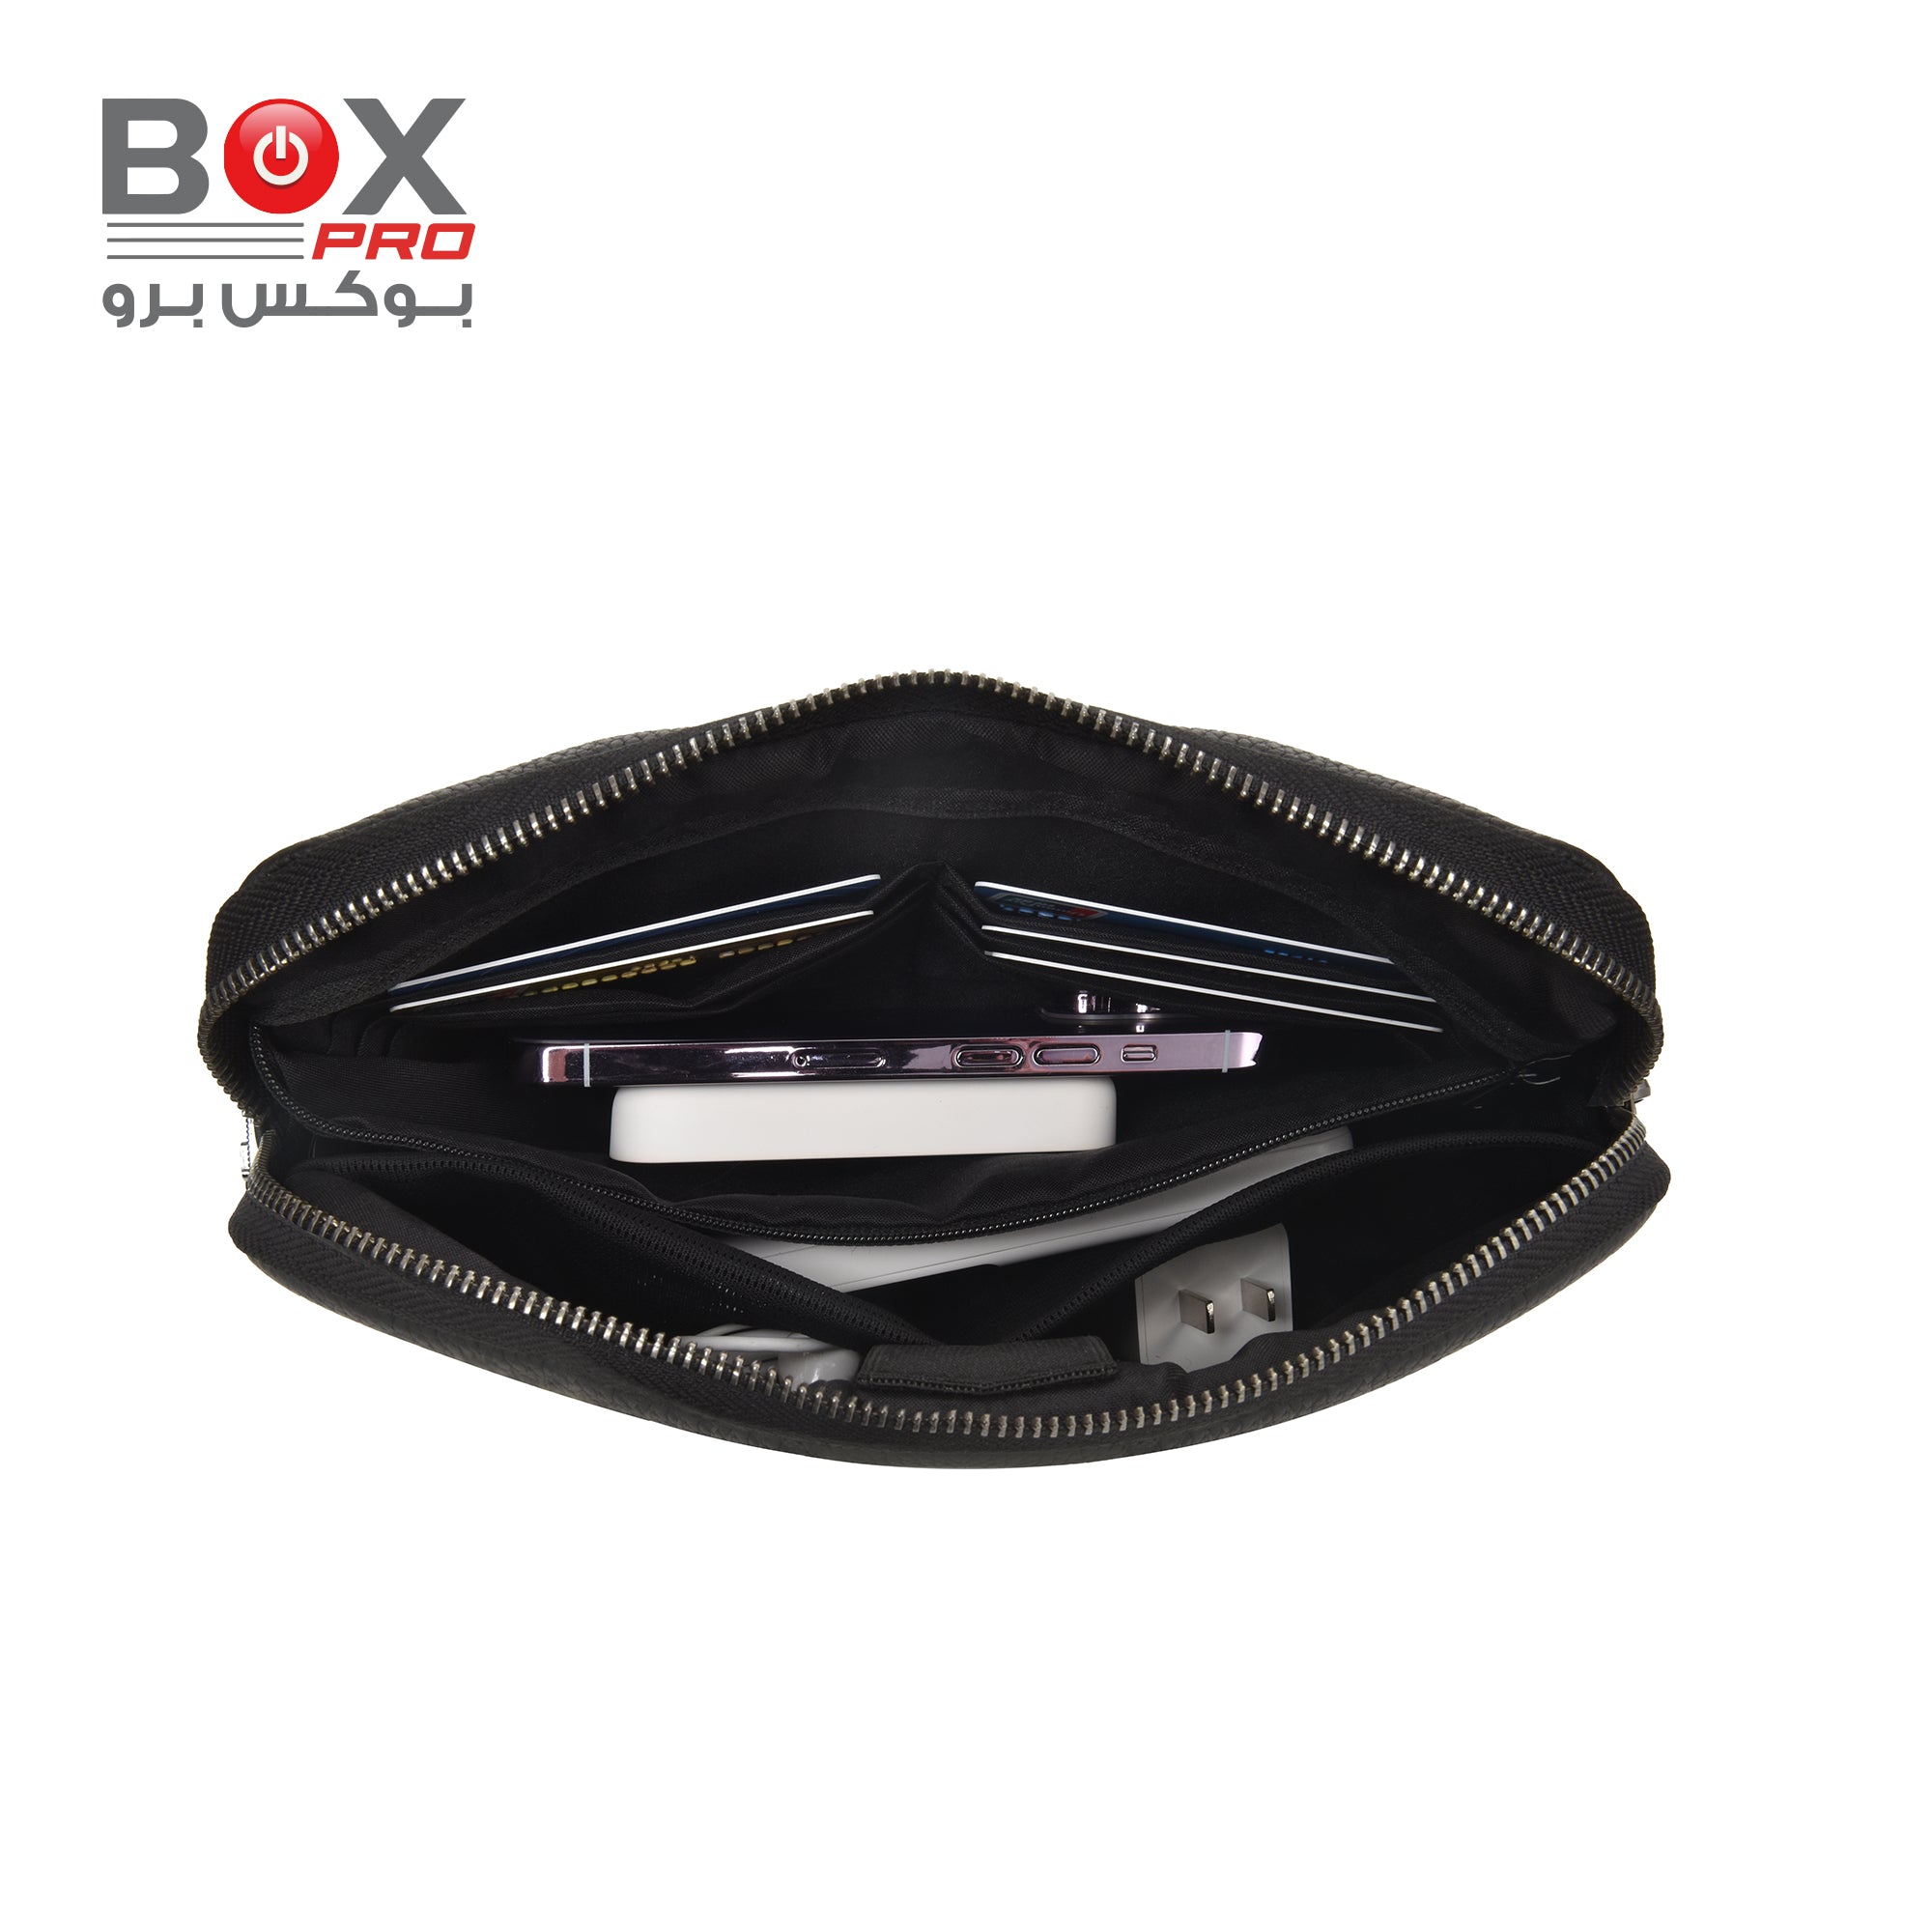 BoxPro Alpha Anti-theft Clutch Bag Travel In Style - Black